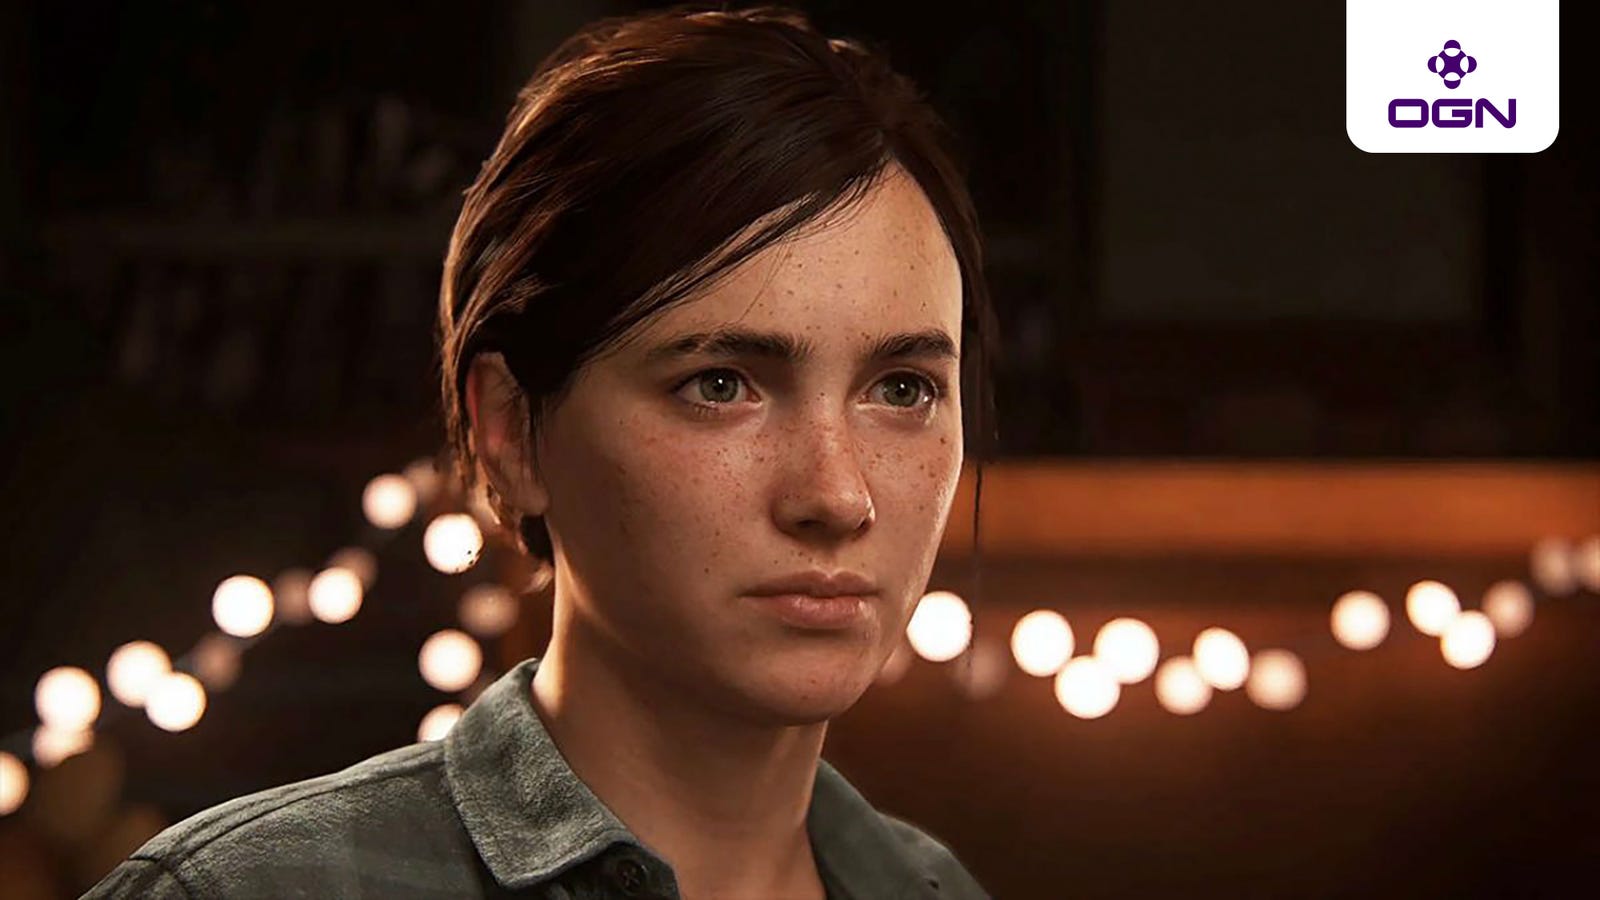 who is ellie modeled after in the last of us